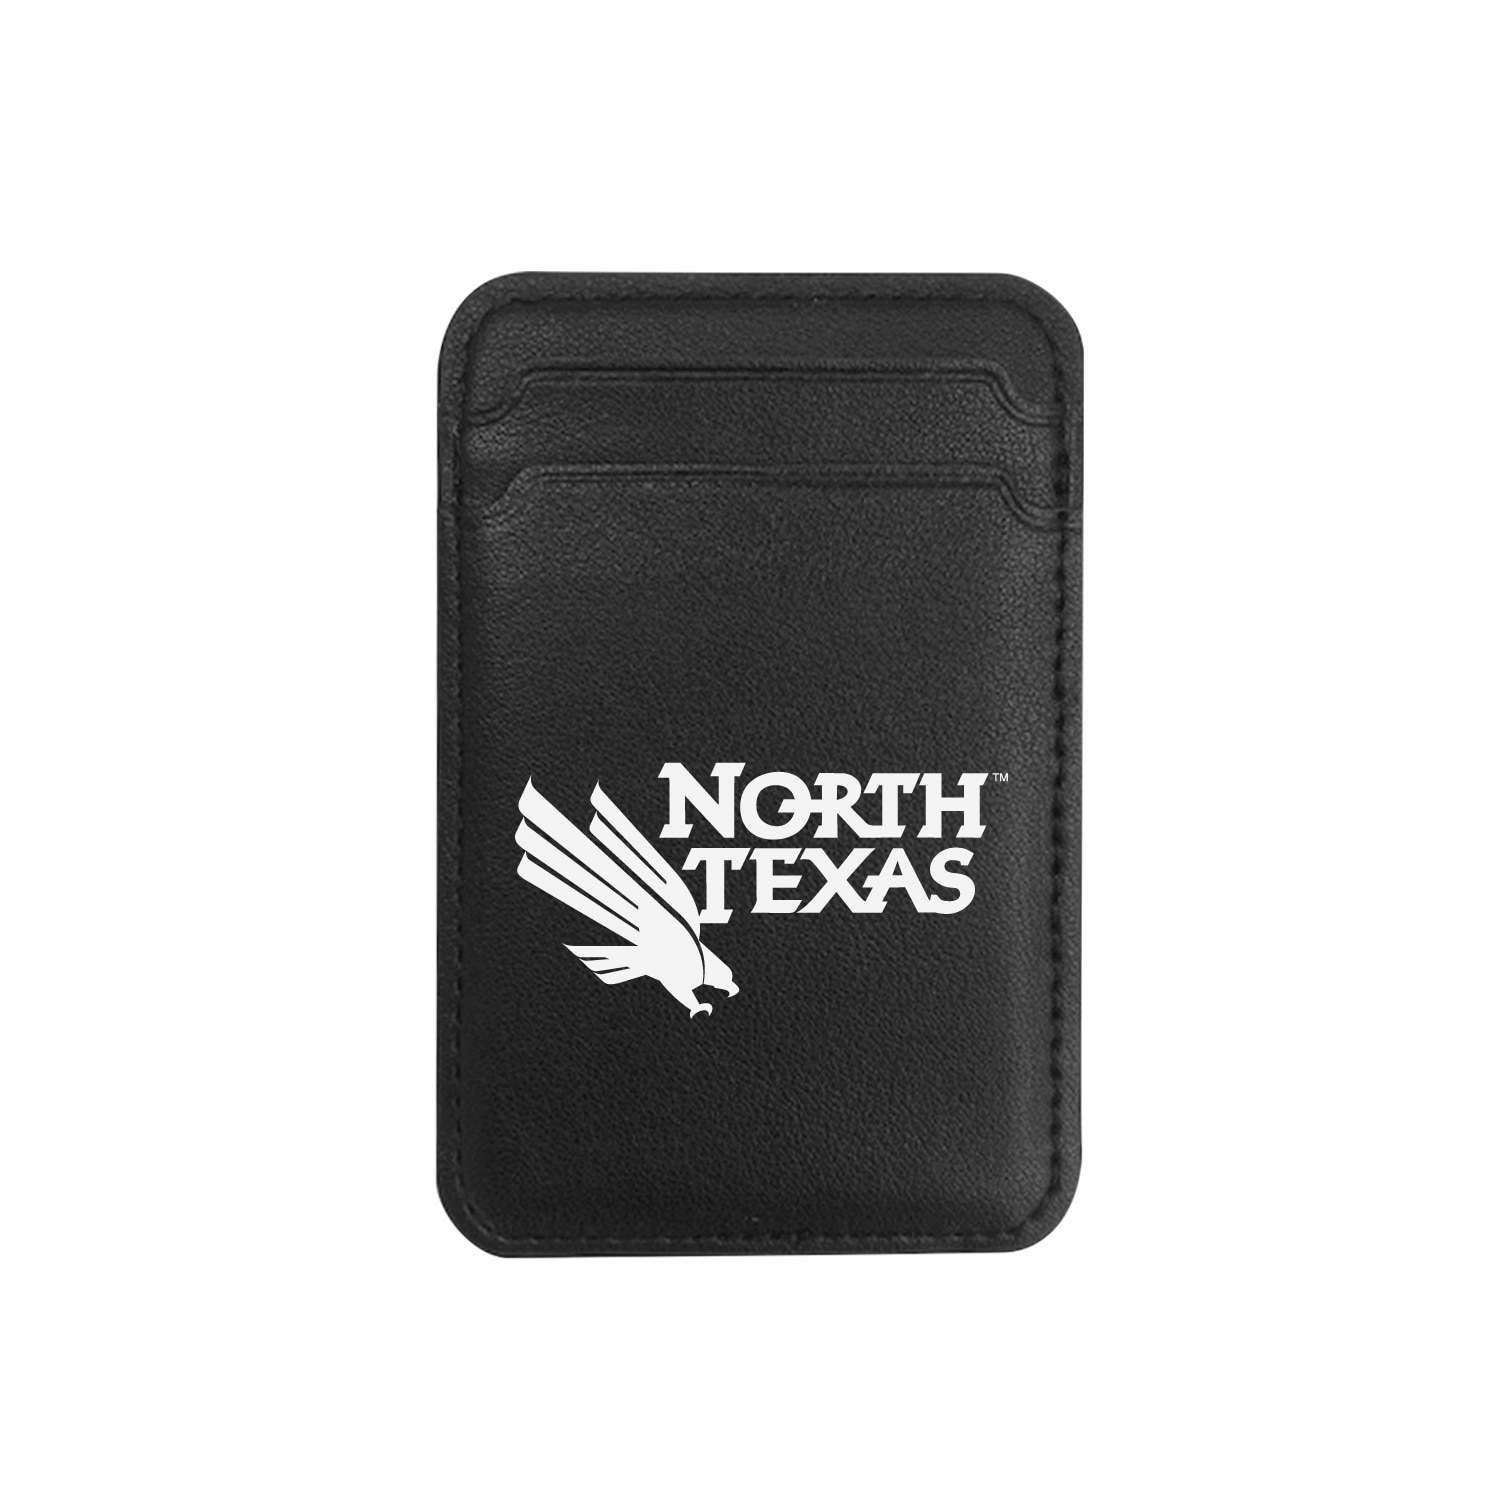 University of North Texas - Leather Wallet Sleeve (Top Load, Mag Safe), Black, Classic V1